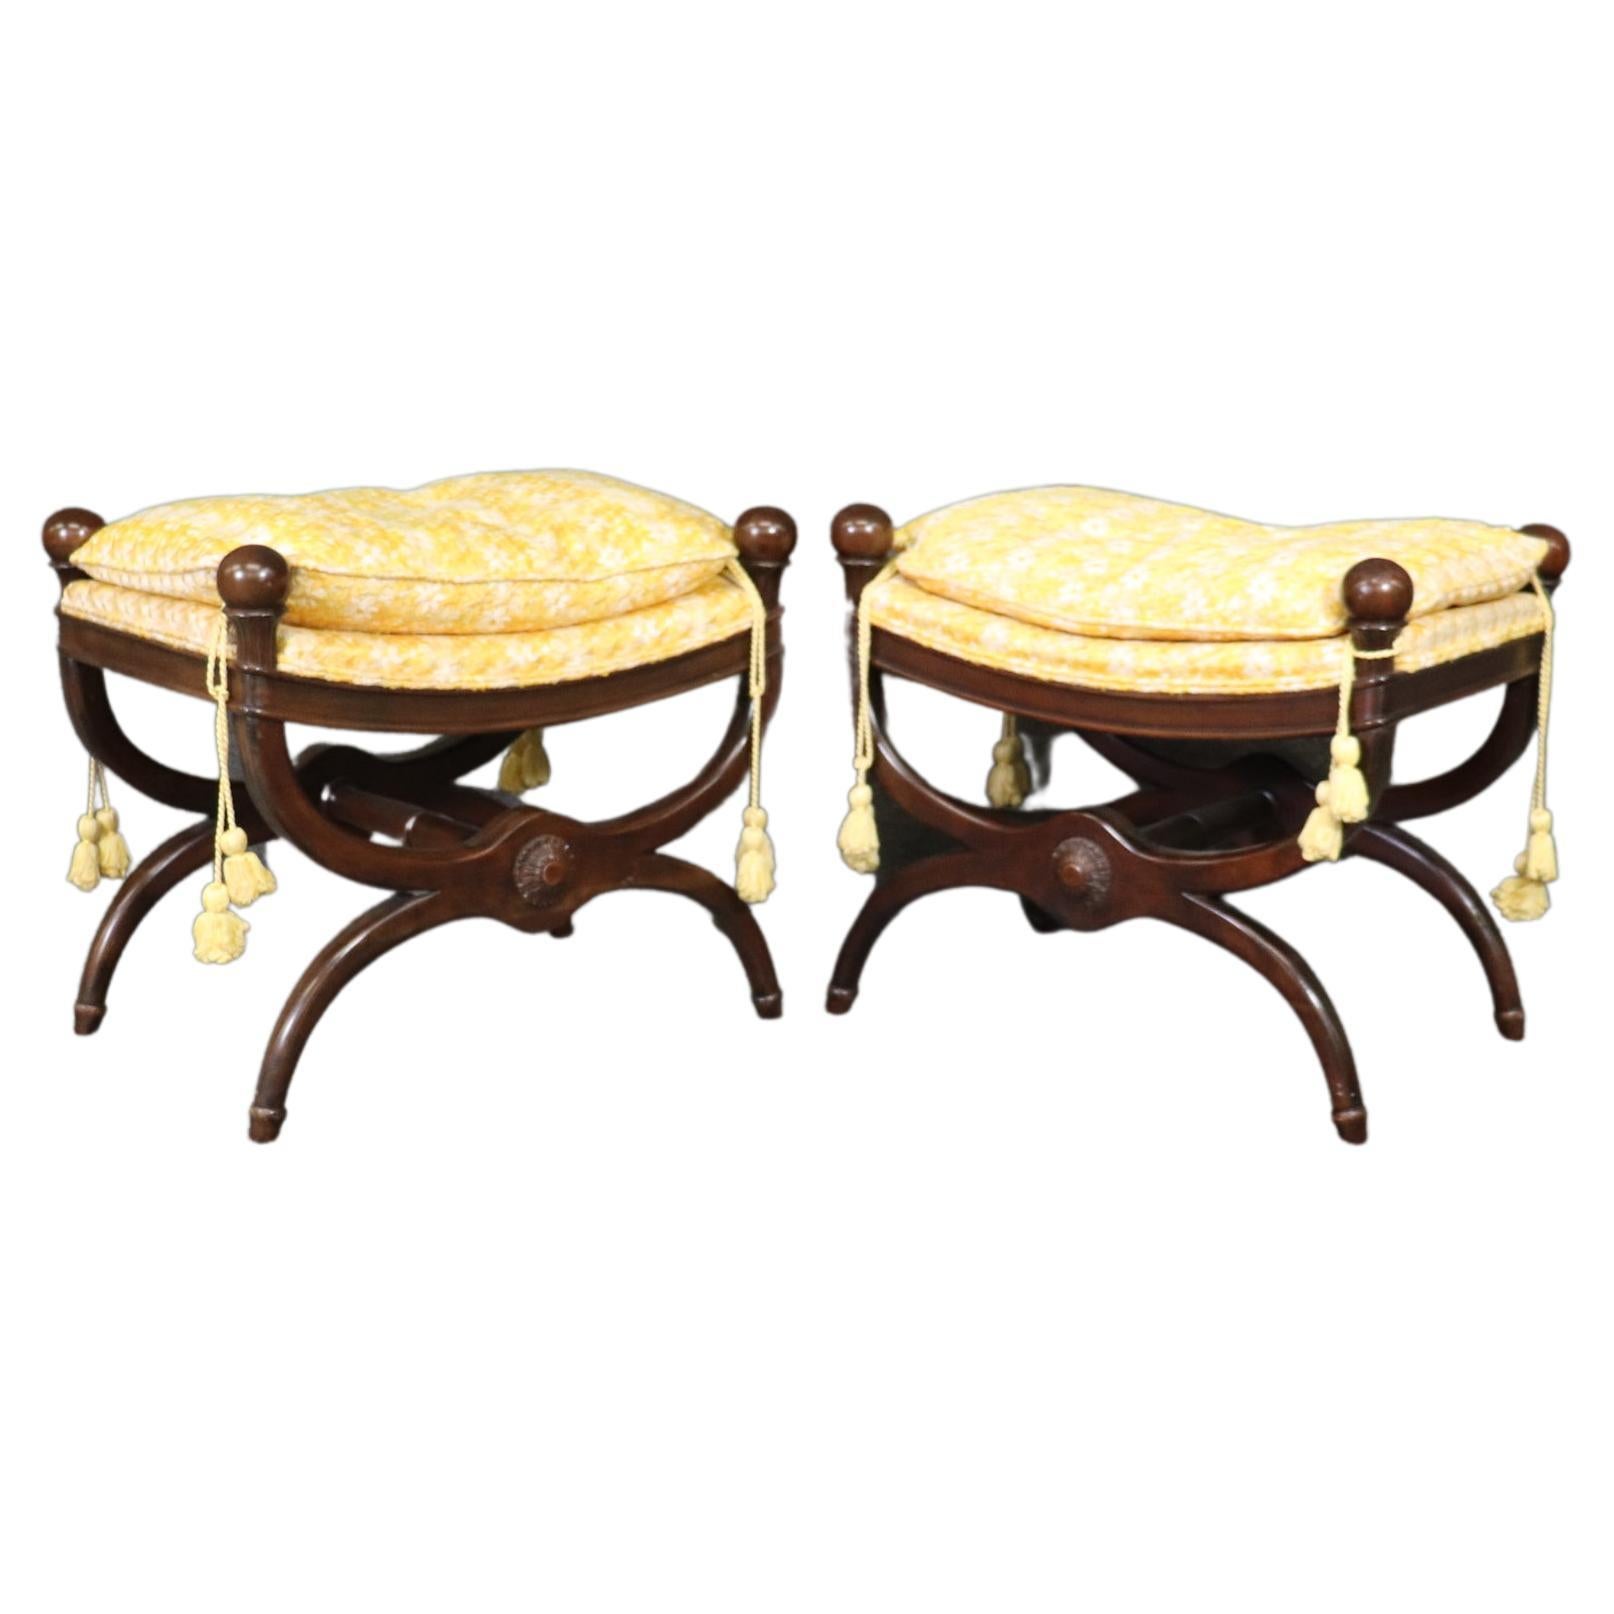 Pair Maison Jansen Attributed Mahogany French Directoire Footstools, Circa 1960s For Sale